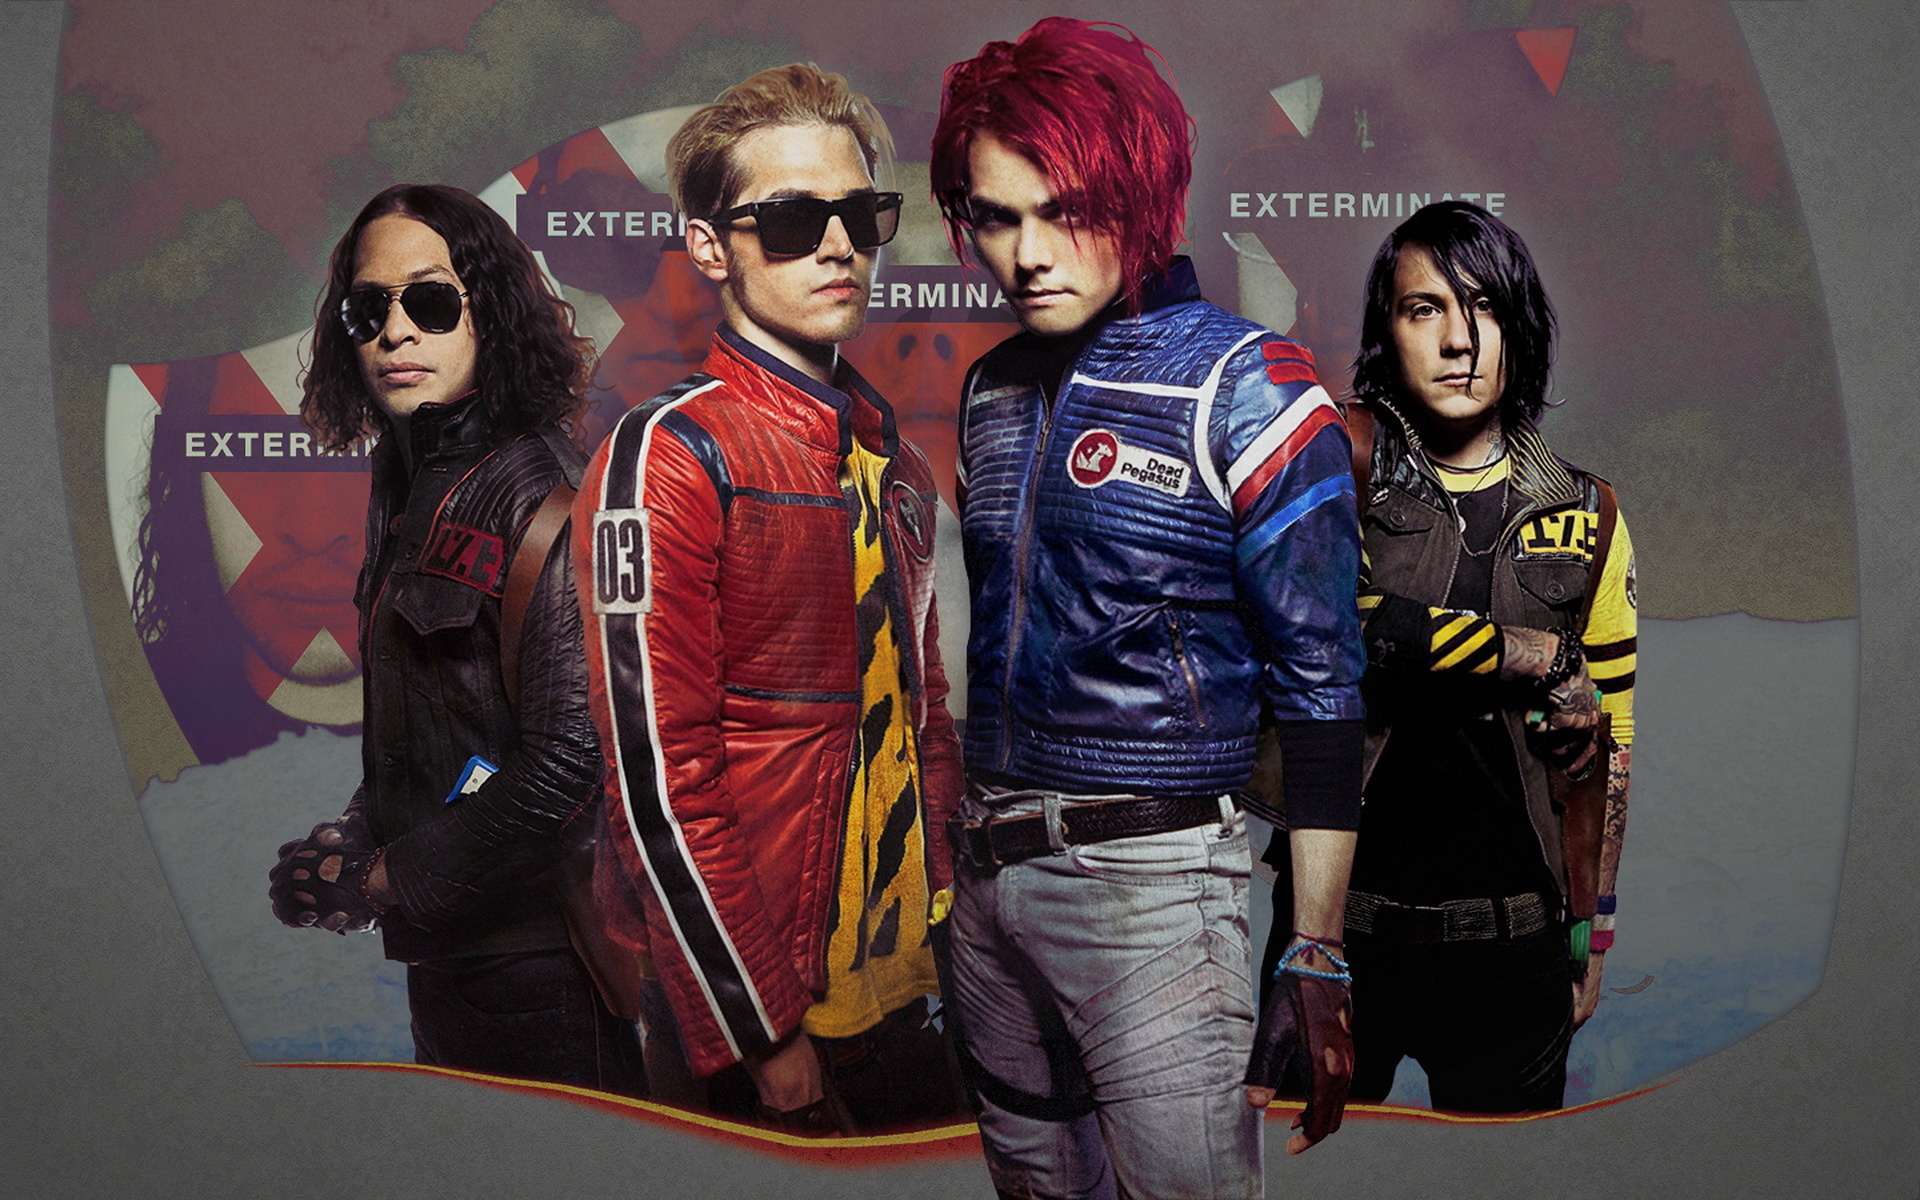 MCR (My Chemical Romance), HD wallpapers, My Chemical Romance visuals, Music enthusiasts, 1920x1200 HD Desktop